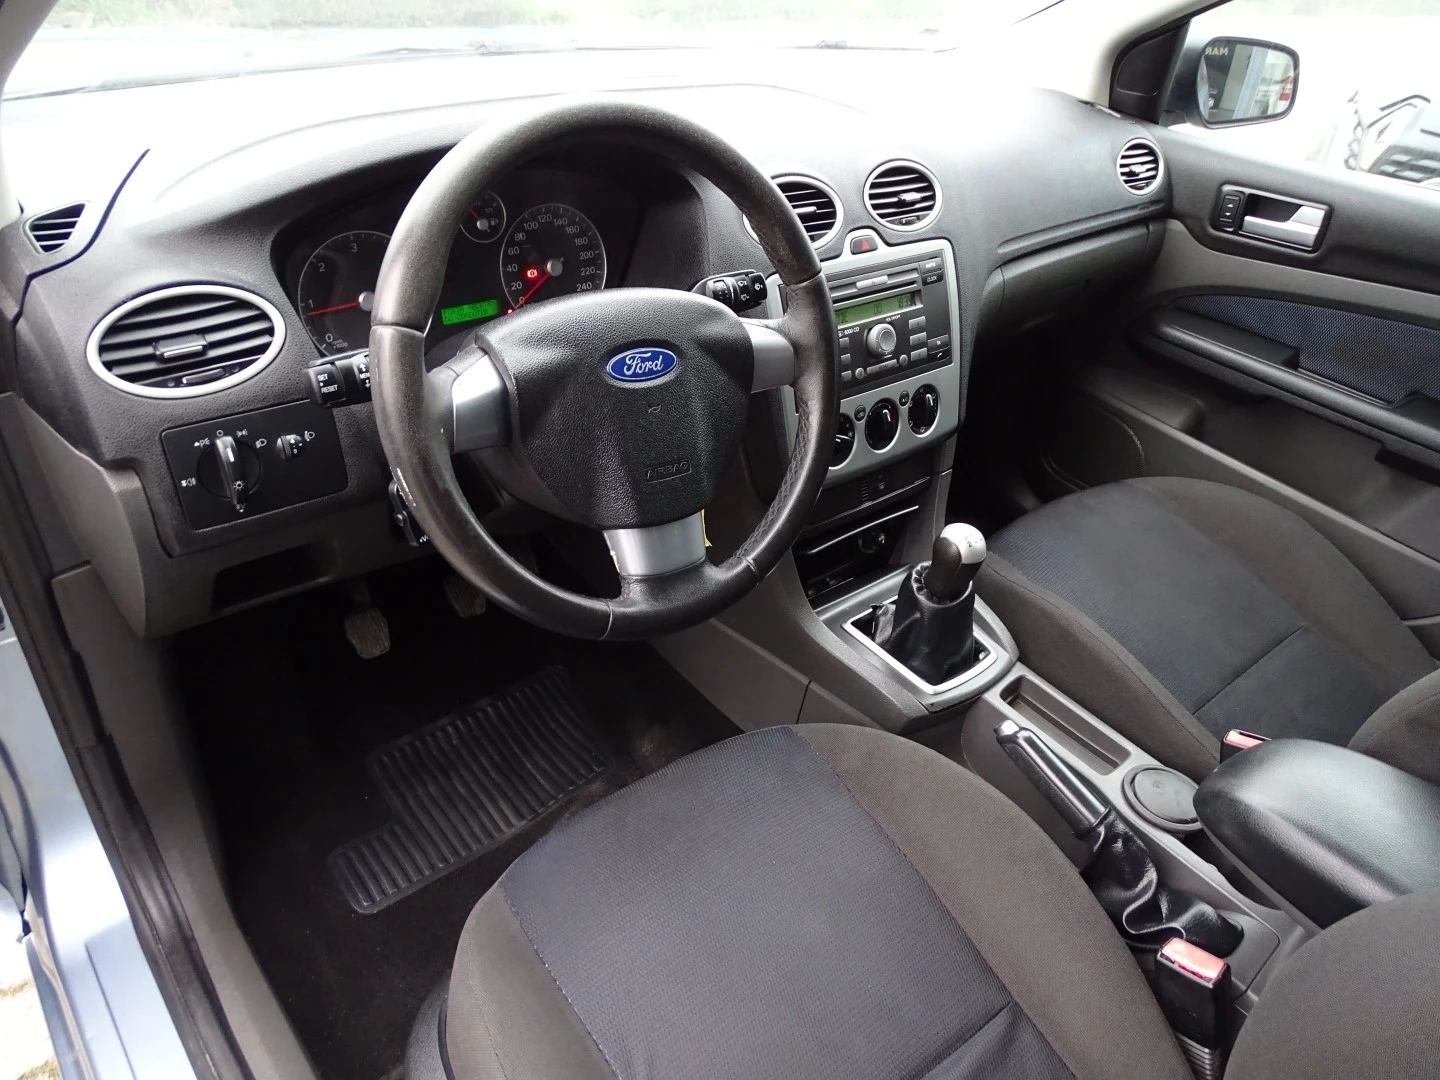 Ford Focus 1.6 TDCi S